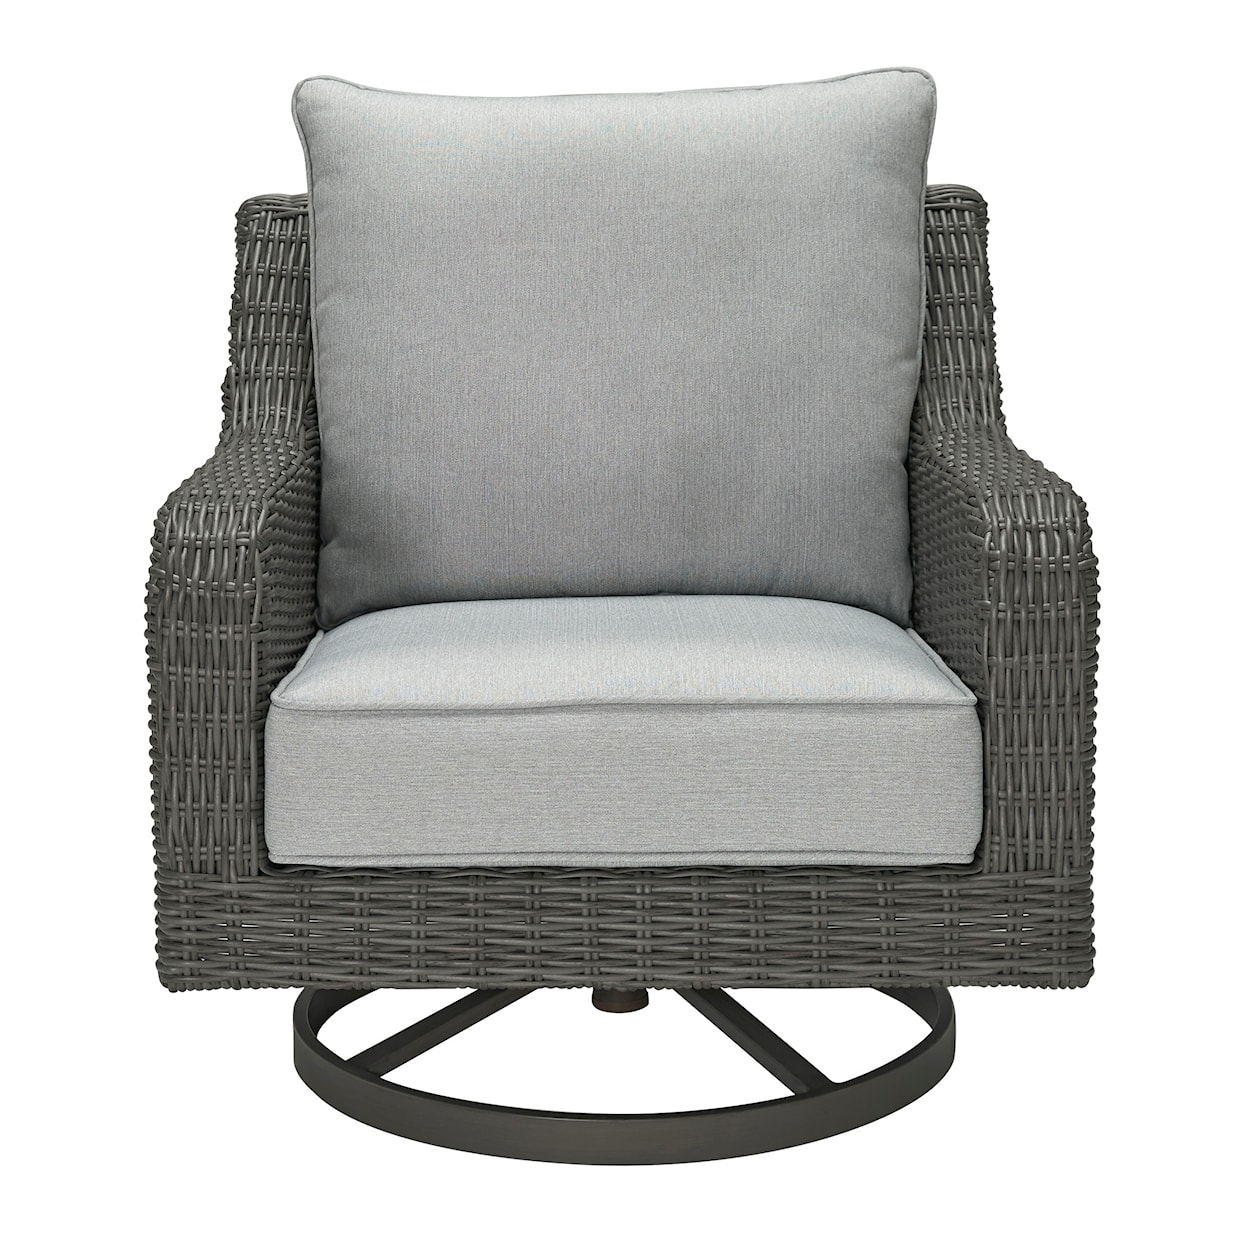 Signature Elite Park Outdoor Swivel Lounge Chair with Cushion